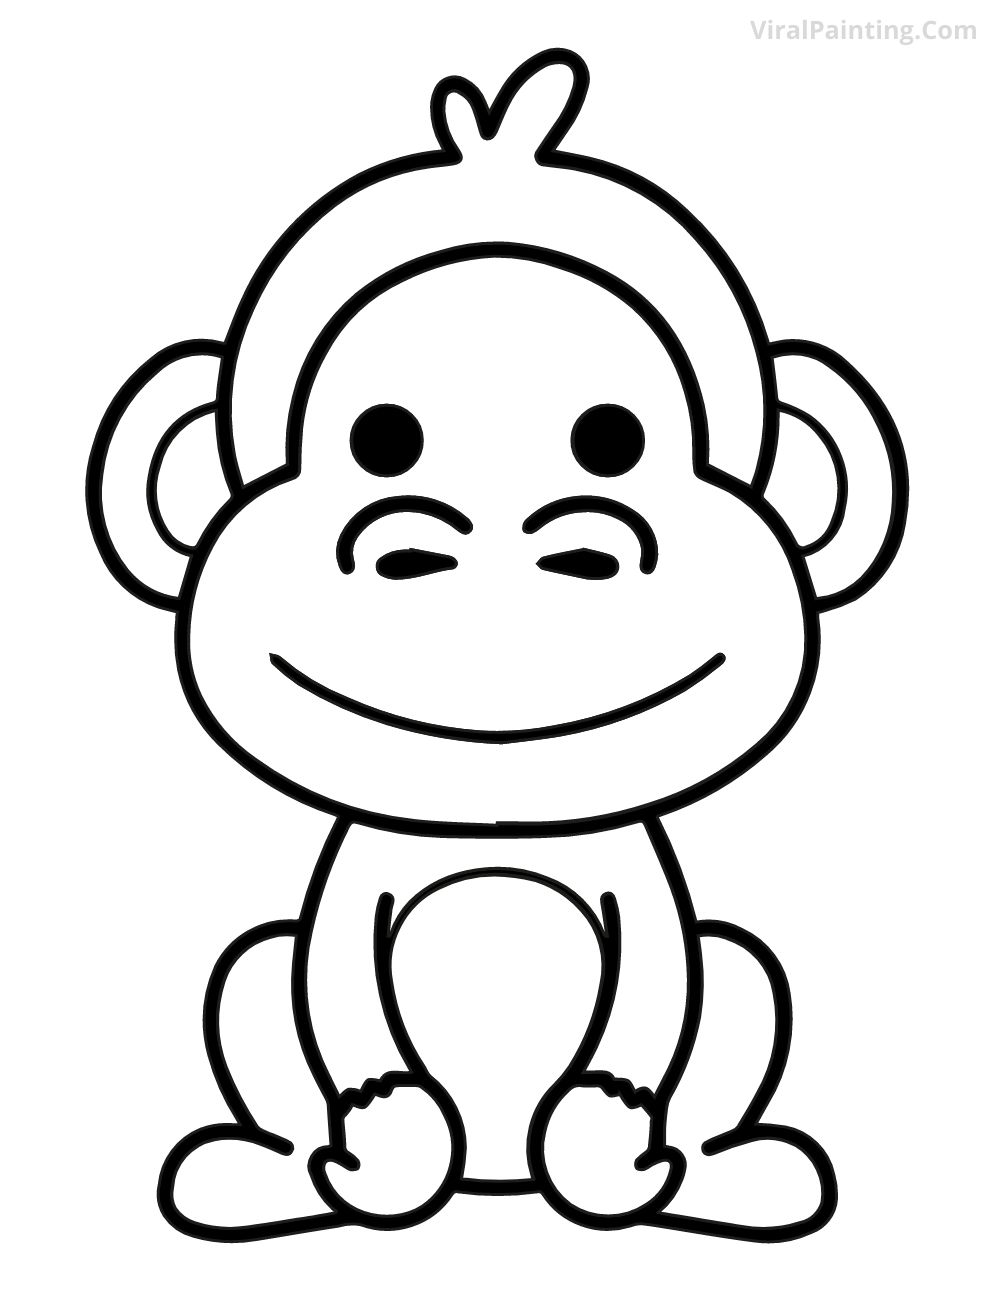 monkey drawing ideas by viral painting